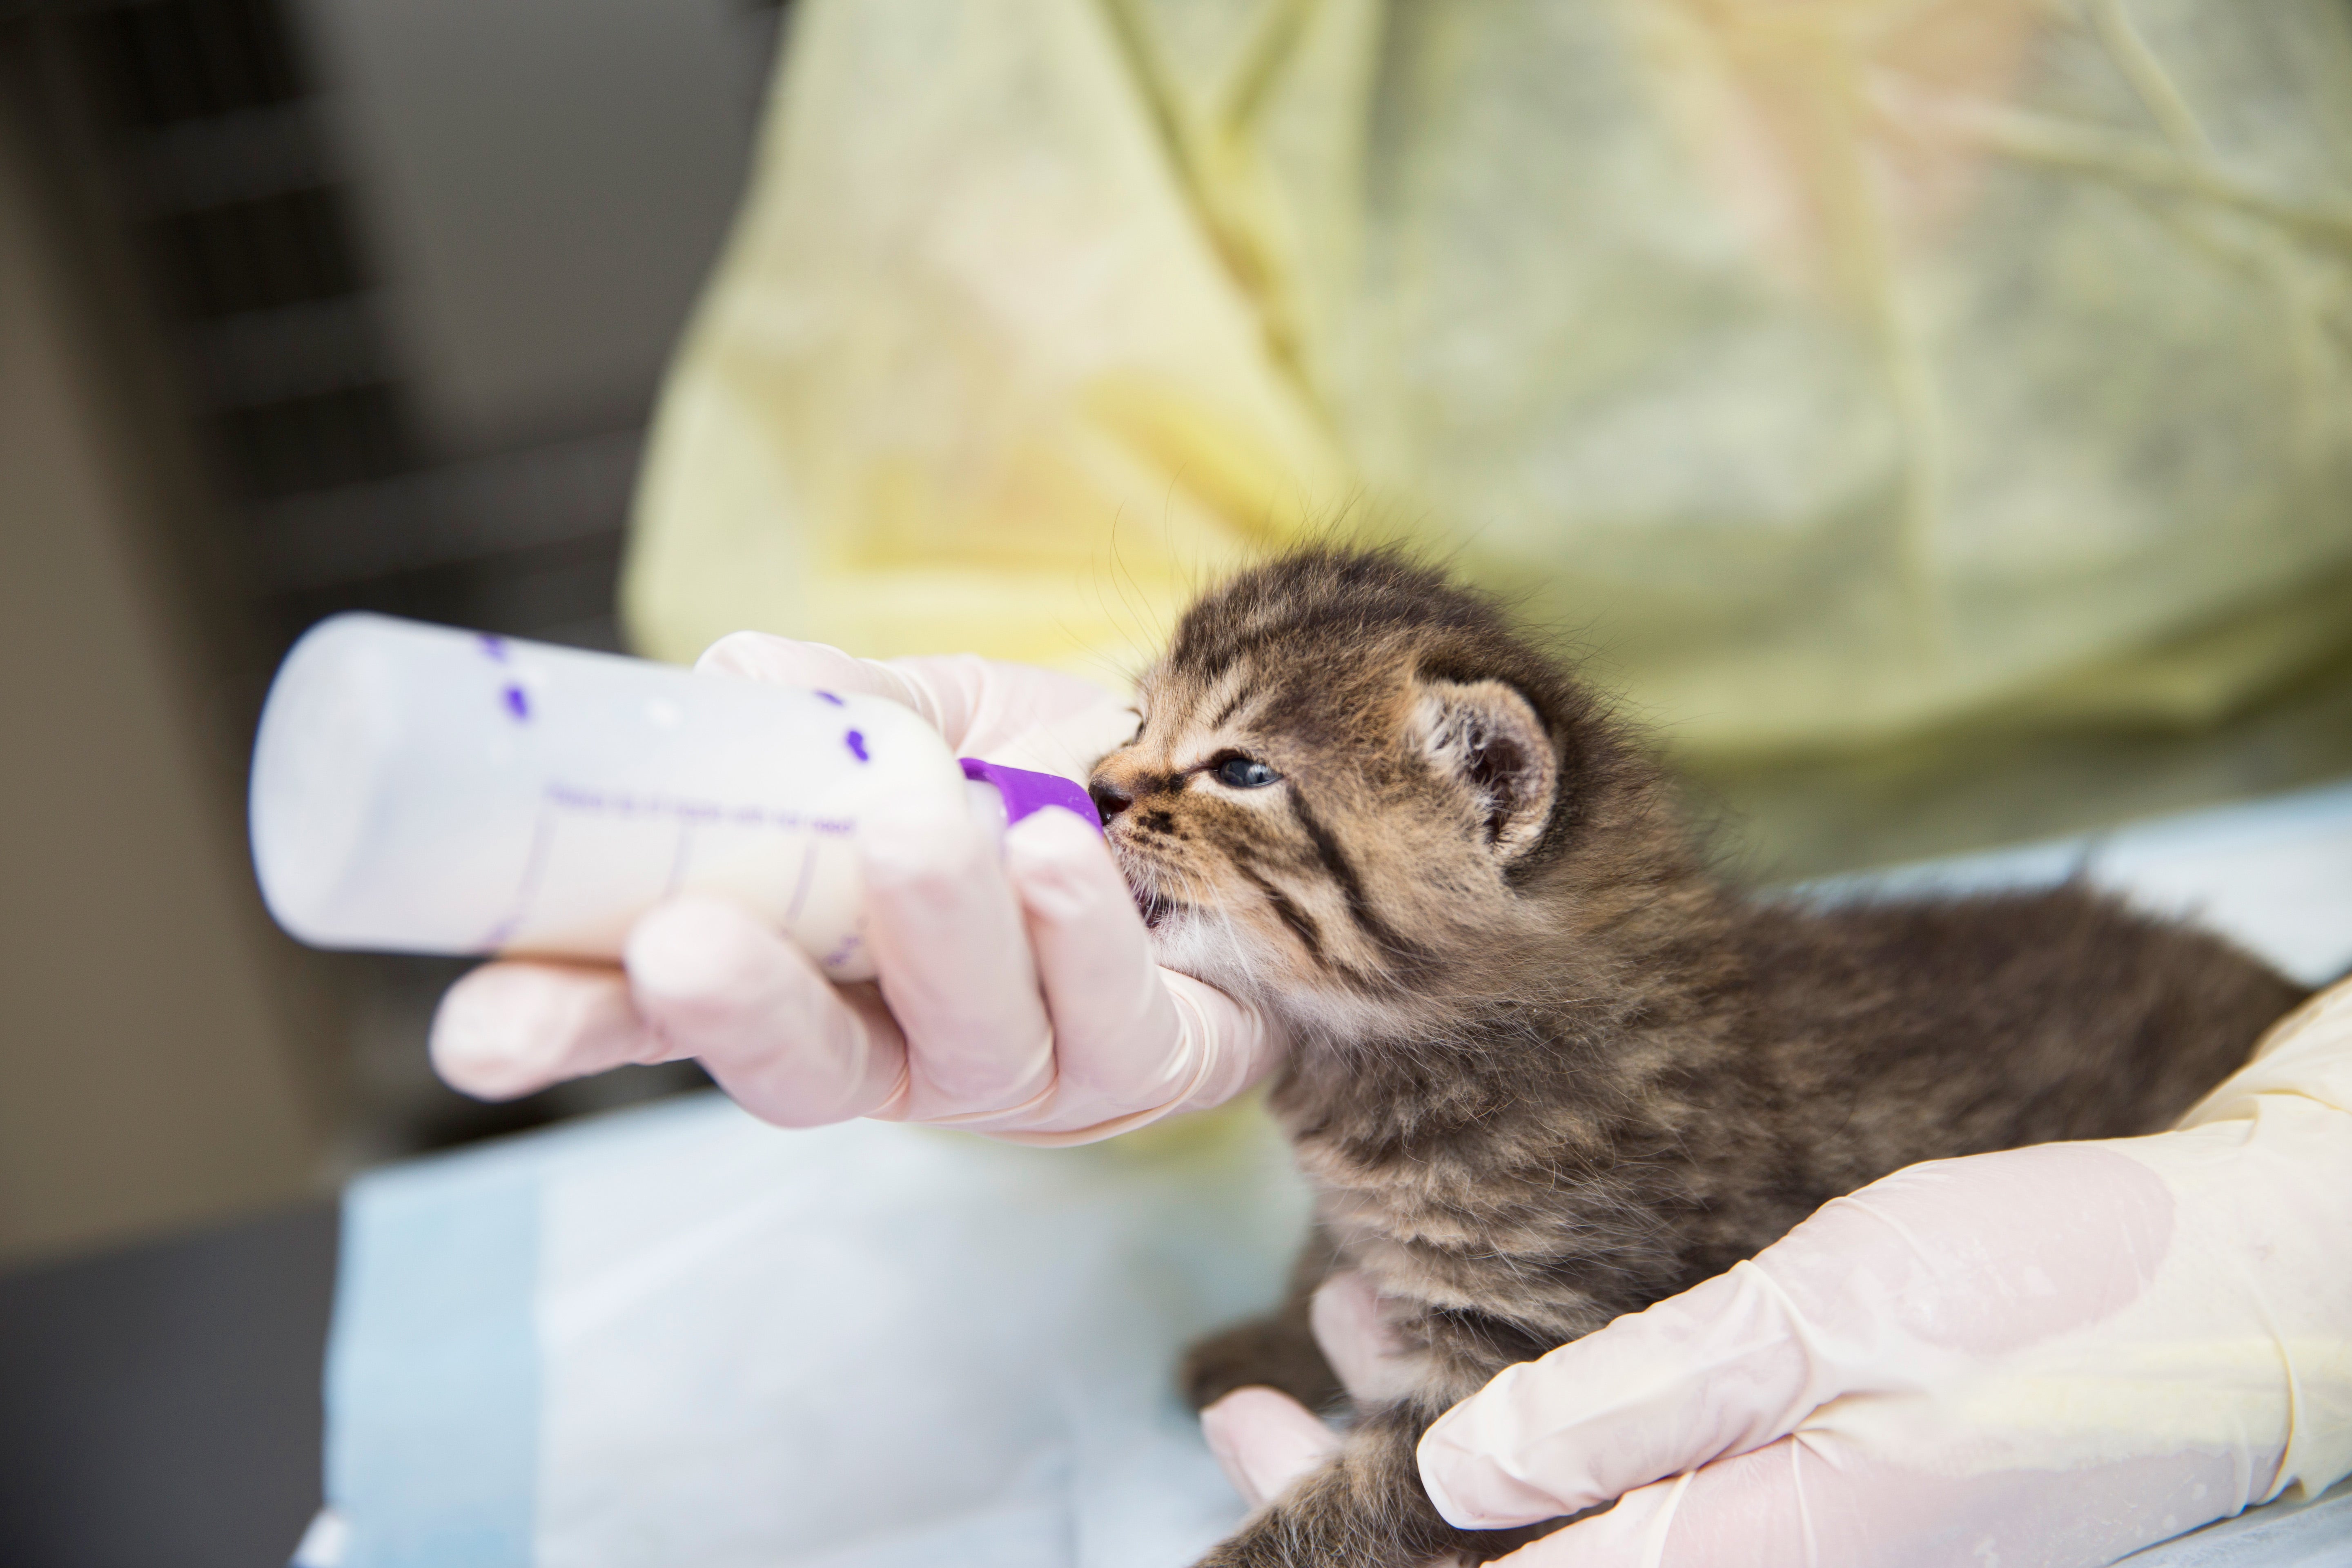 Person with gloved hands bottle-feeding a neonatal kitten